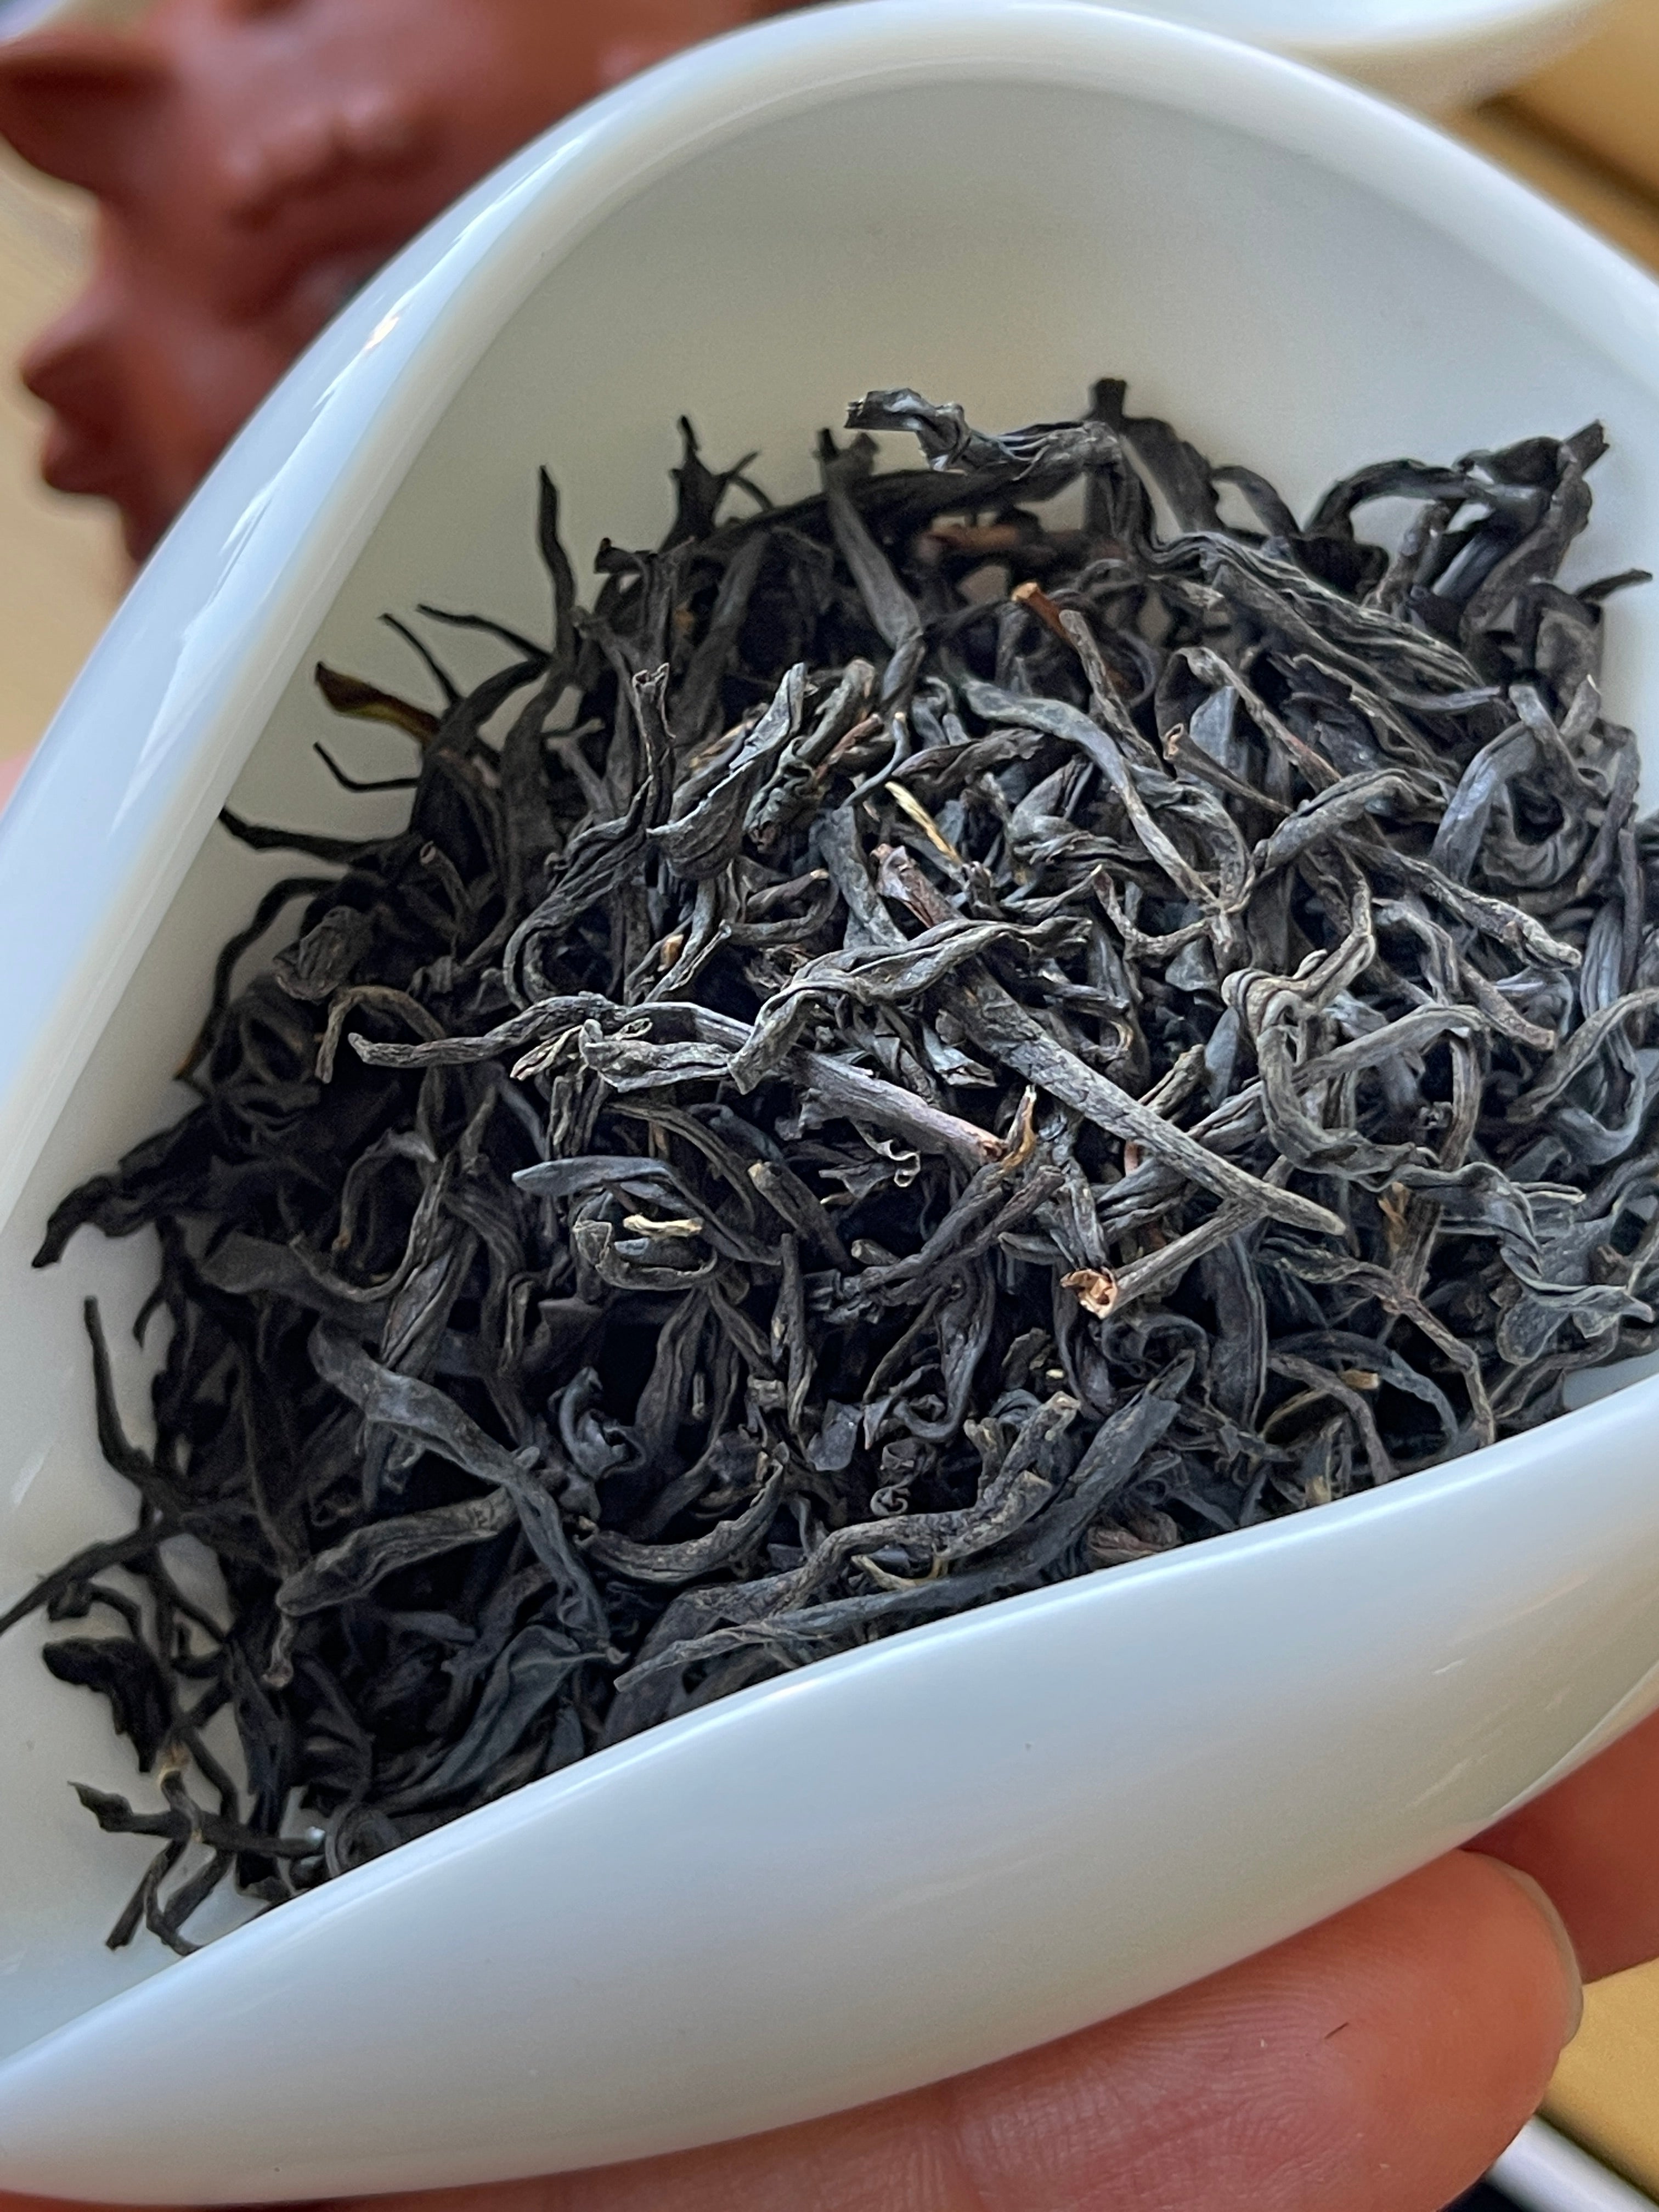 Meizhan Floral Scent Red Tea